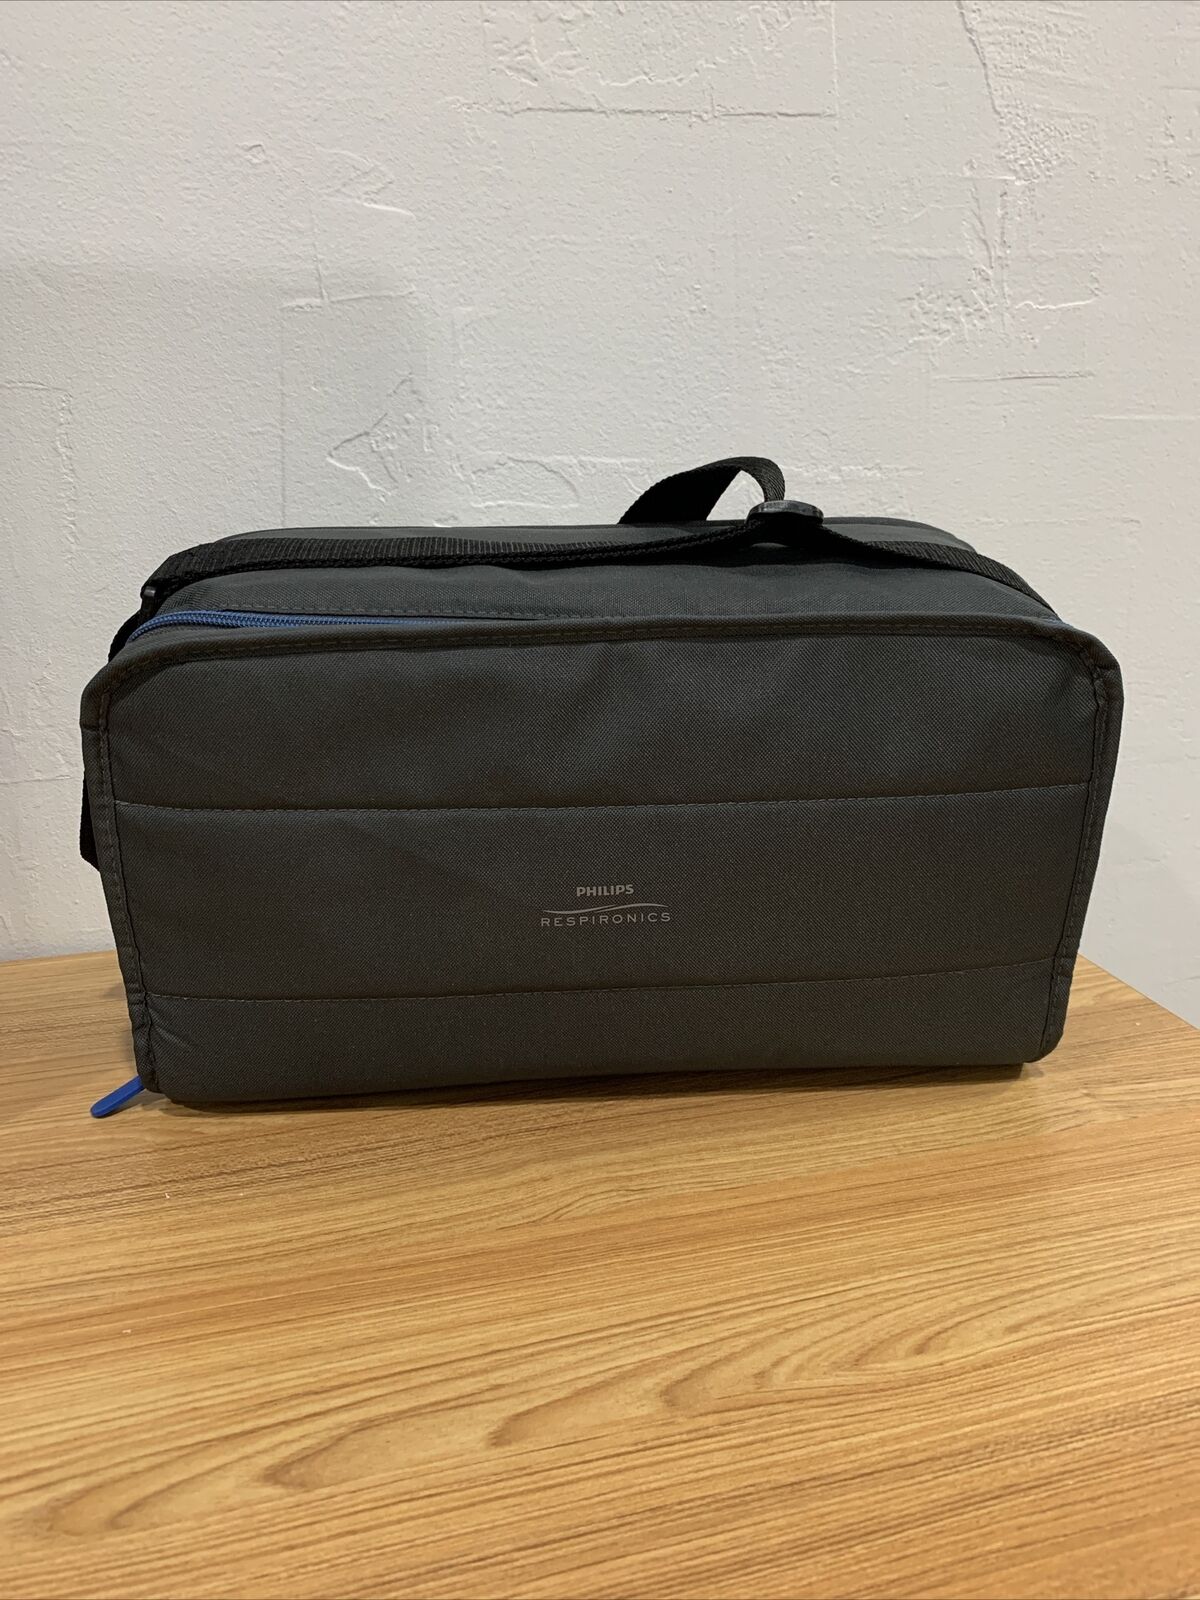 Philips Respironics Dreamstation Cpap Travel Bag Carrying Case Gray Zippered